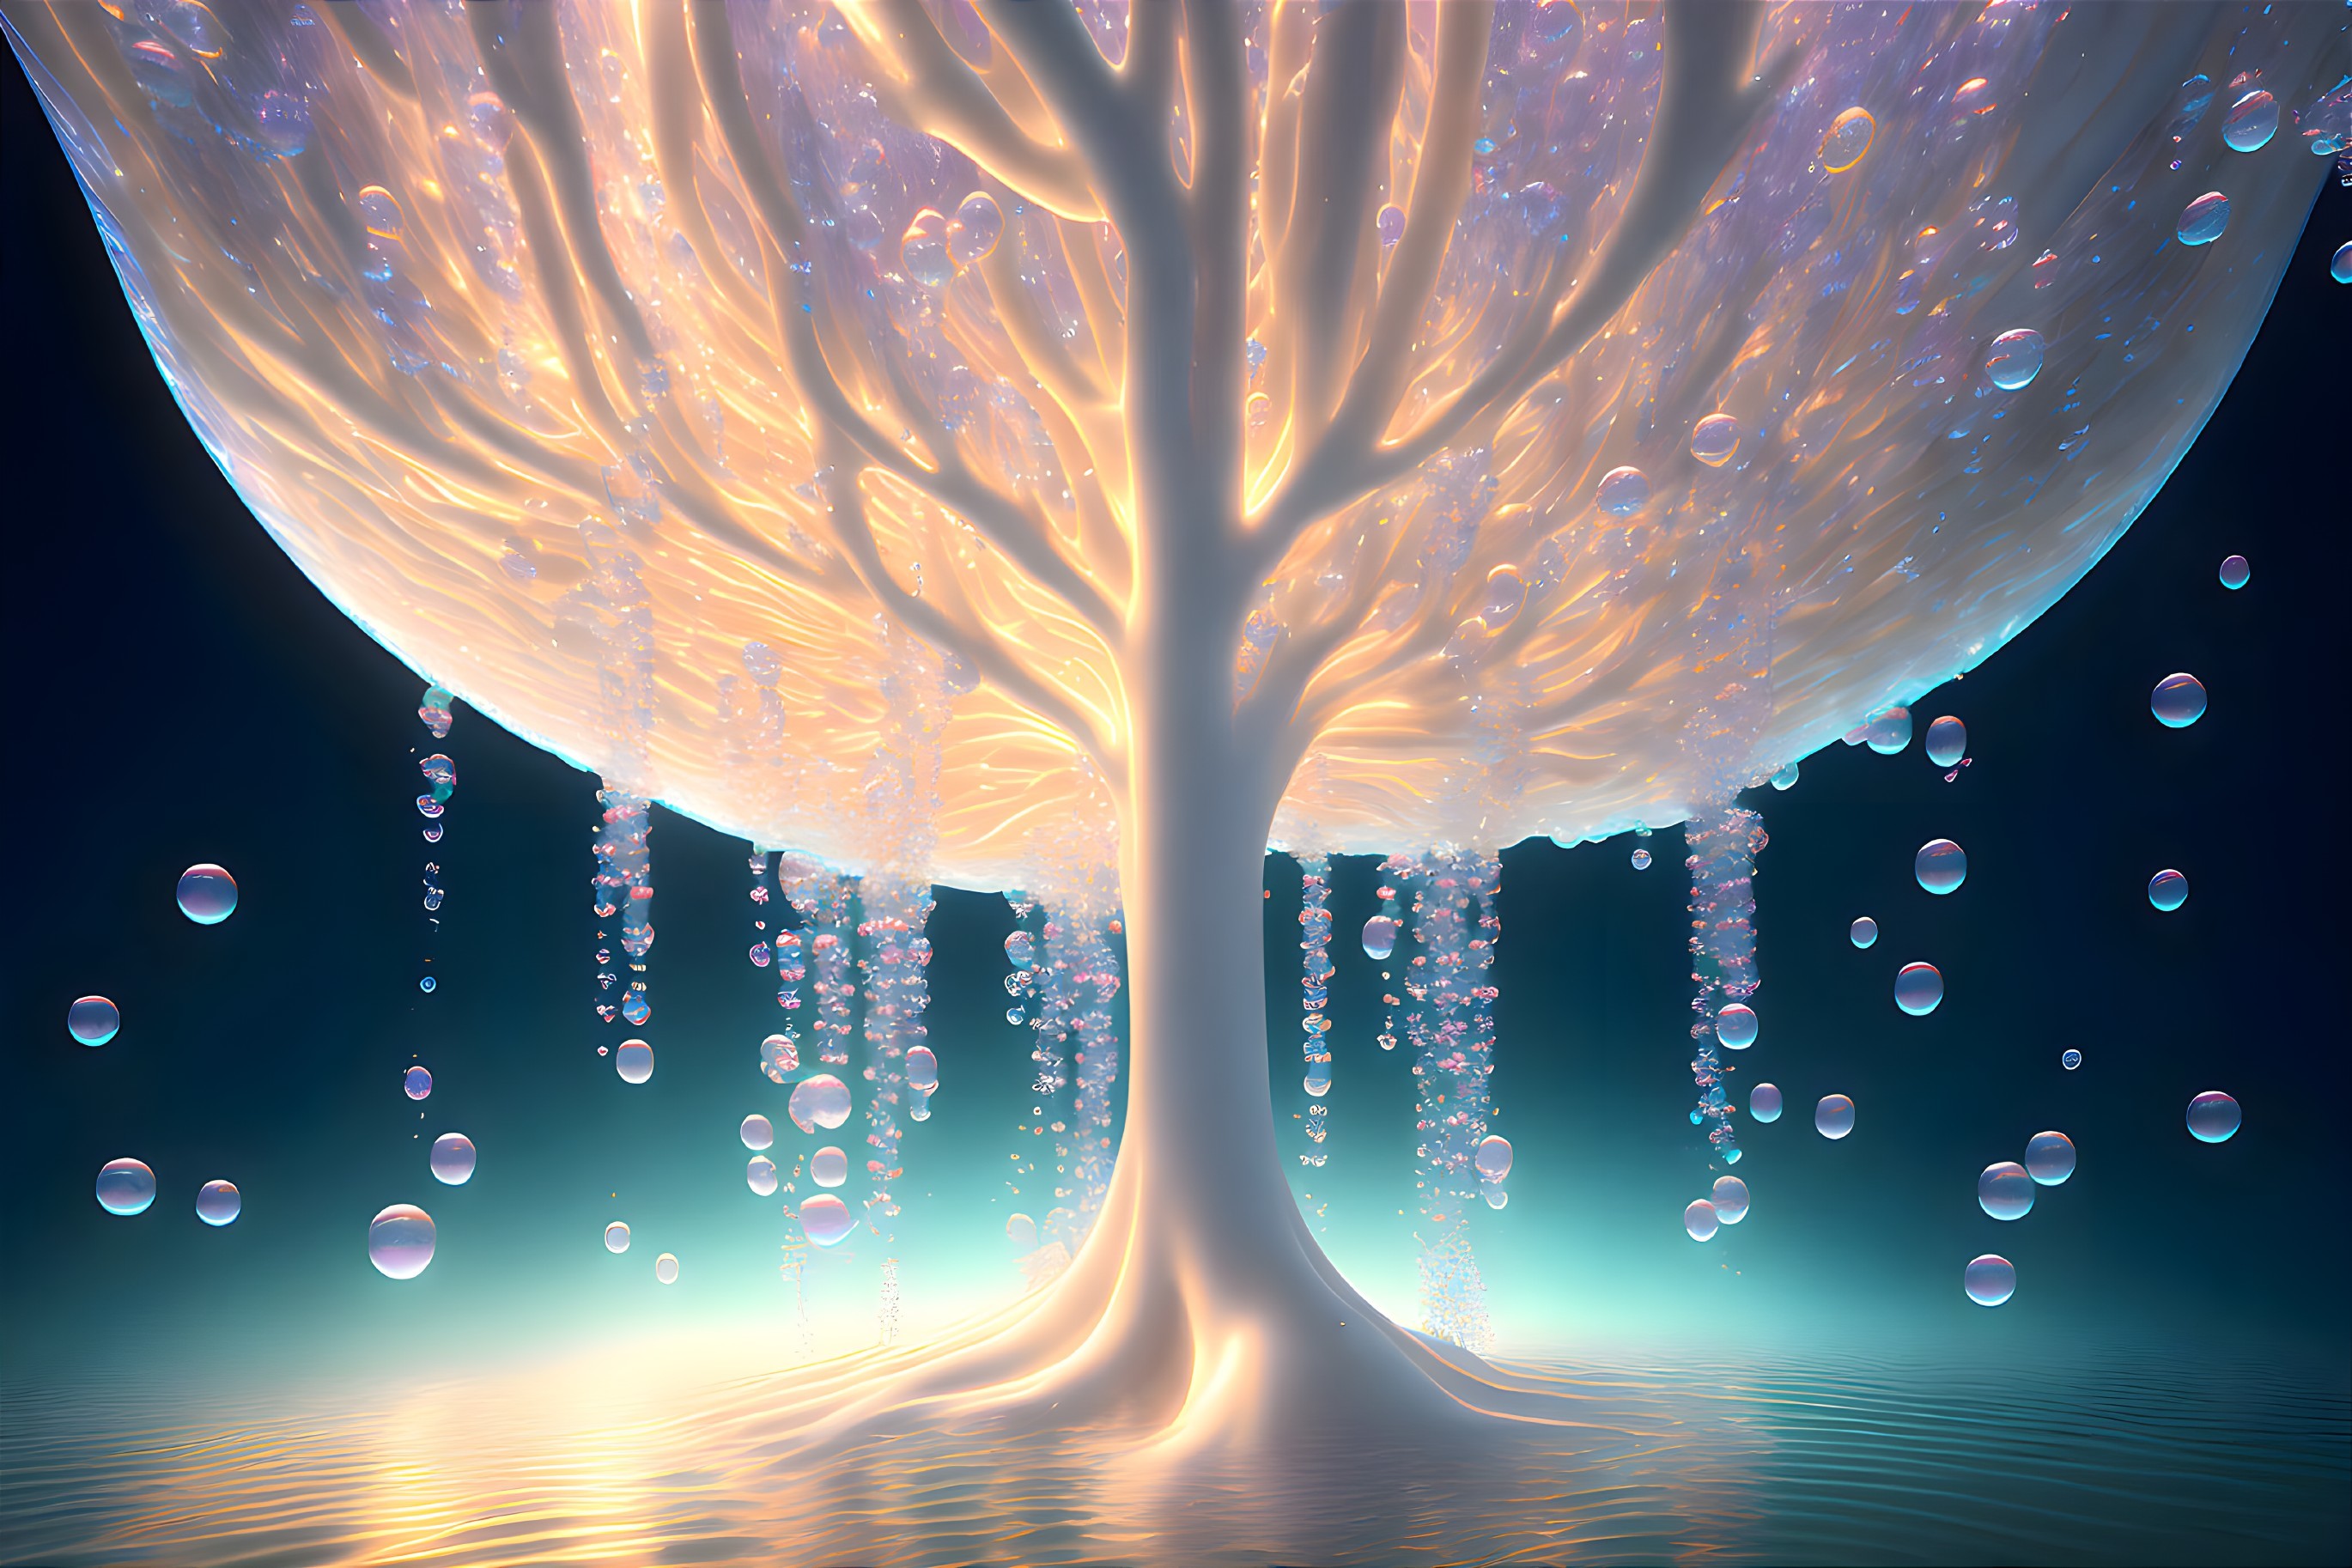 Ascension of souls at the luminous Tree of Life